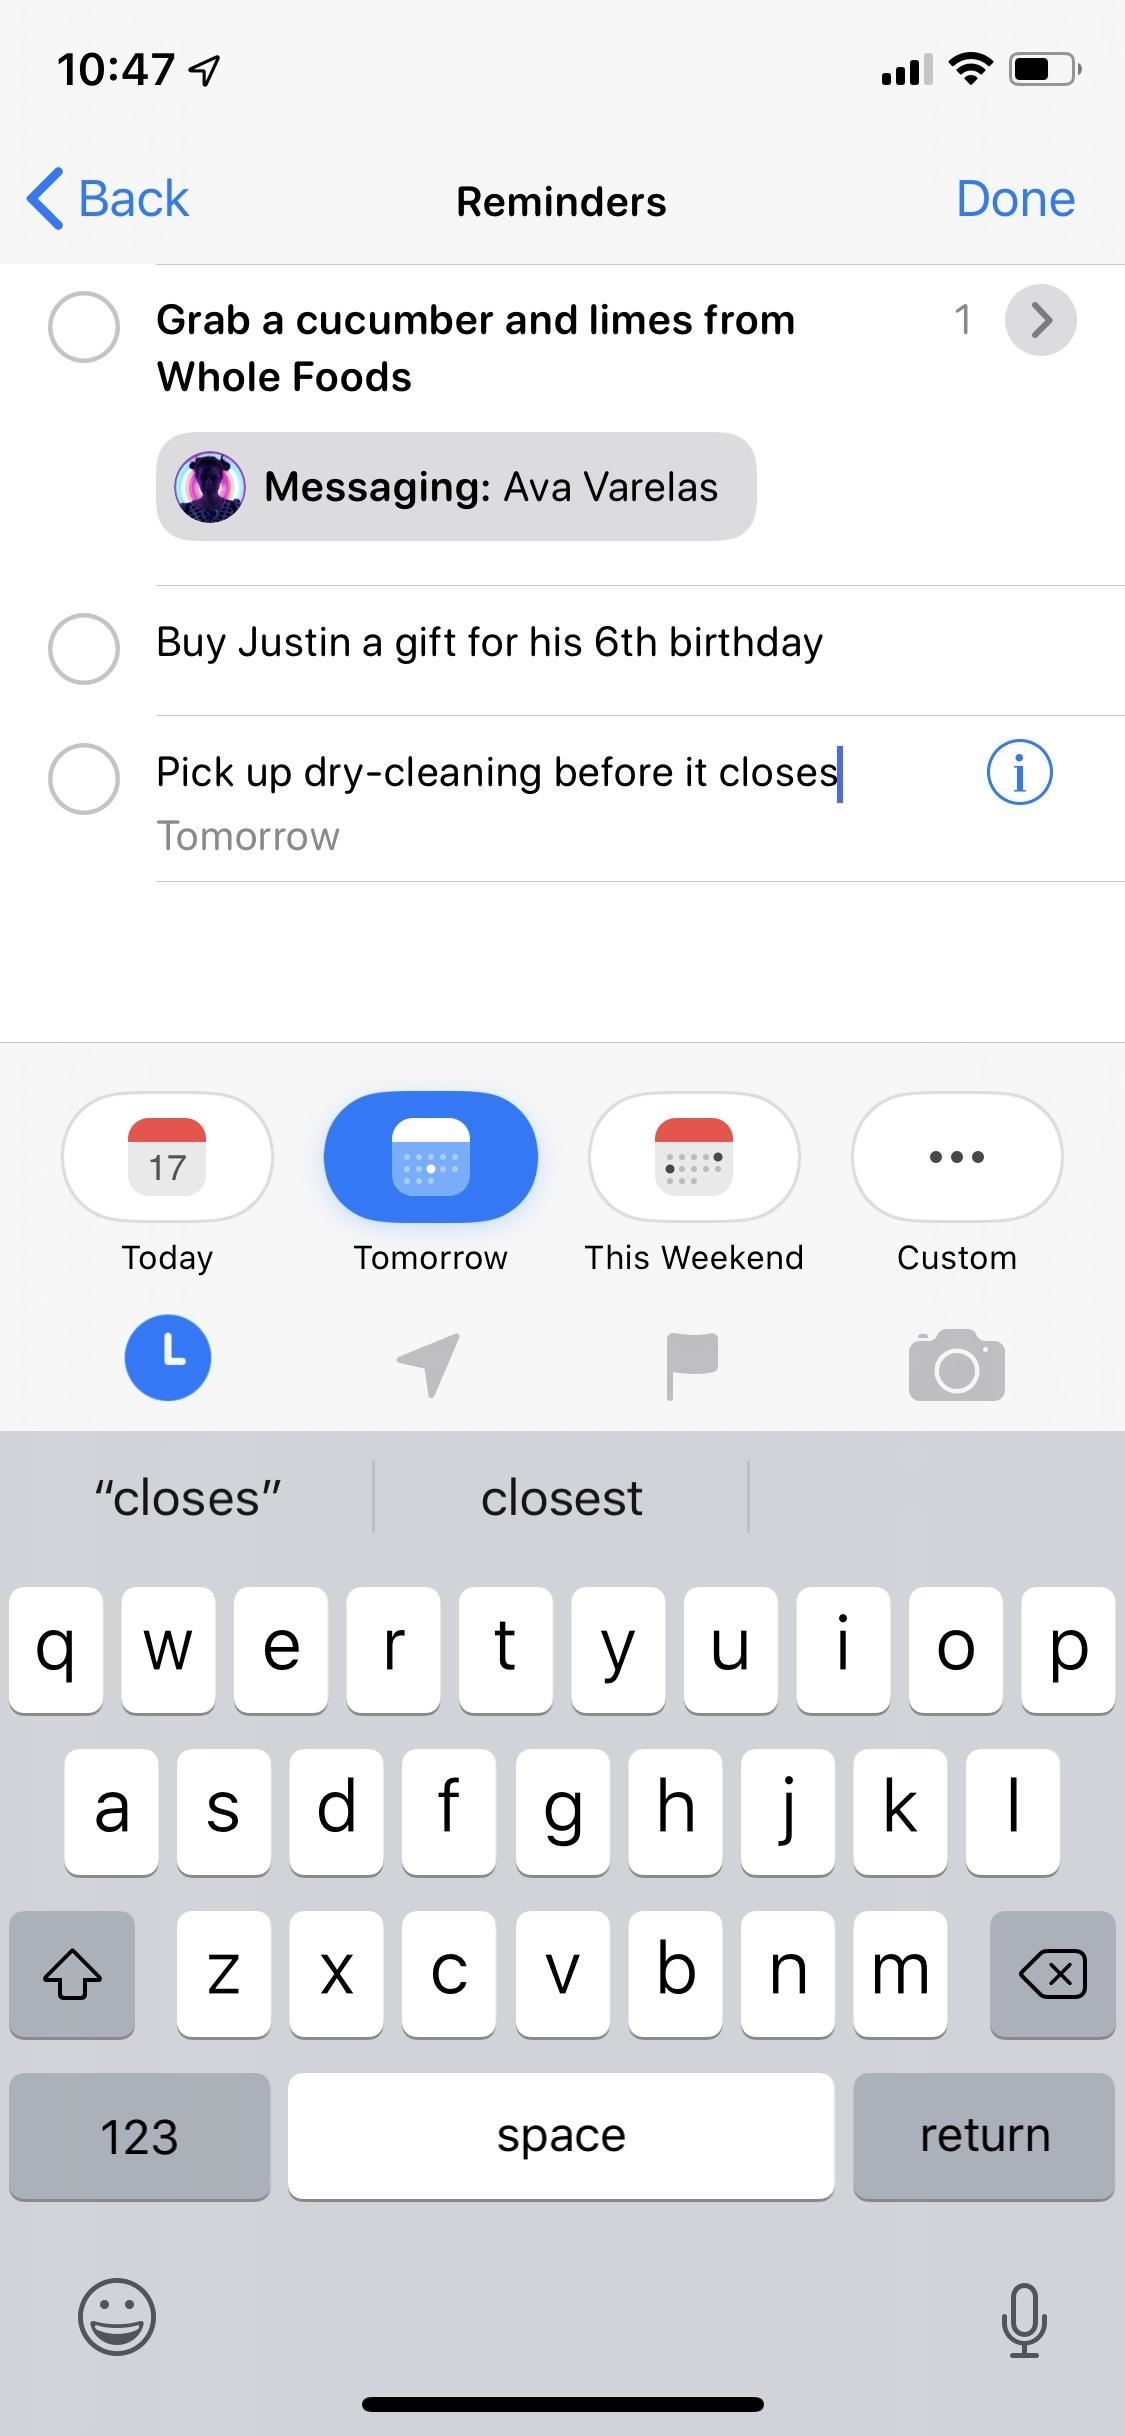 Use Reminder's New Quick Toolbar in iOS 13 to Add Times, Locations, Flags & Images to Tasks